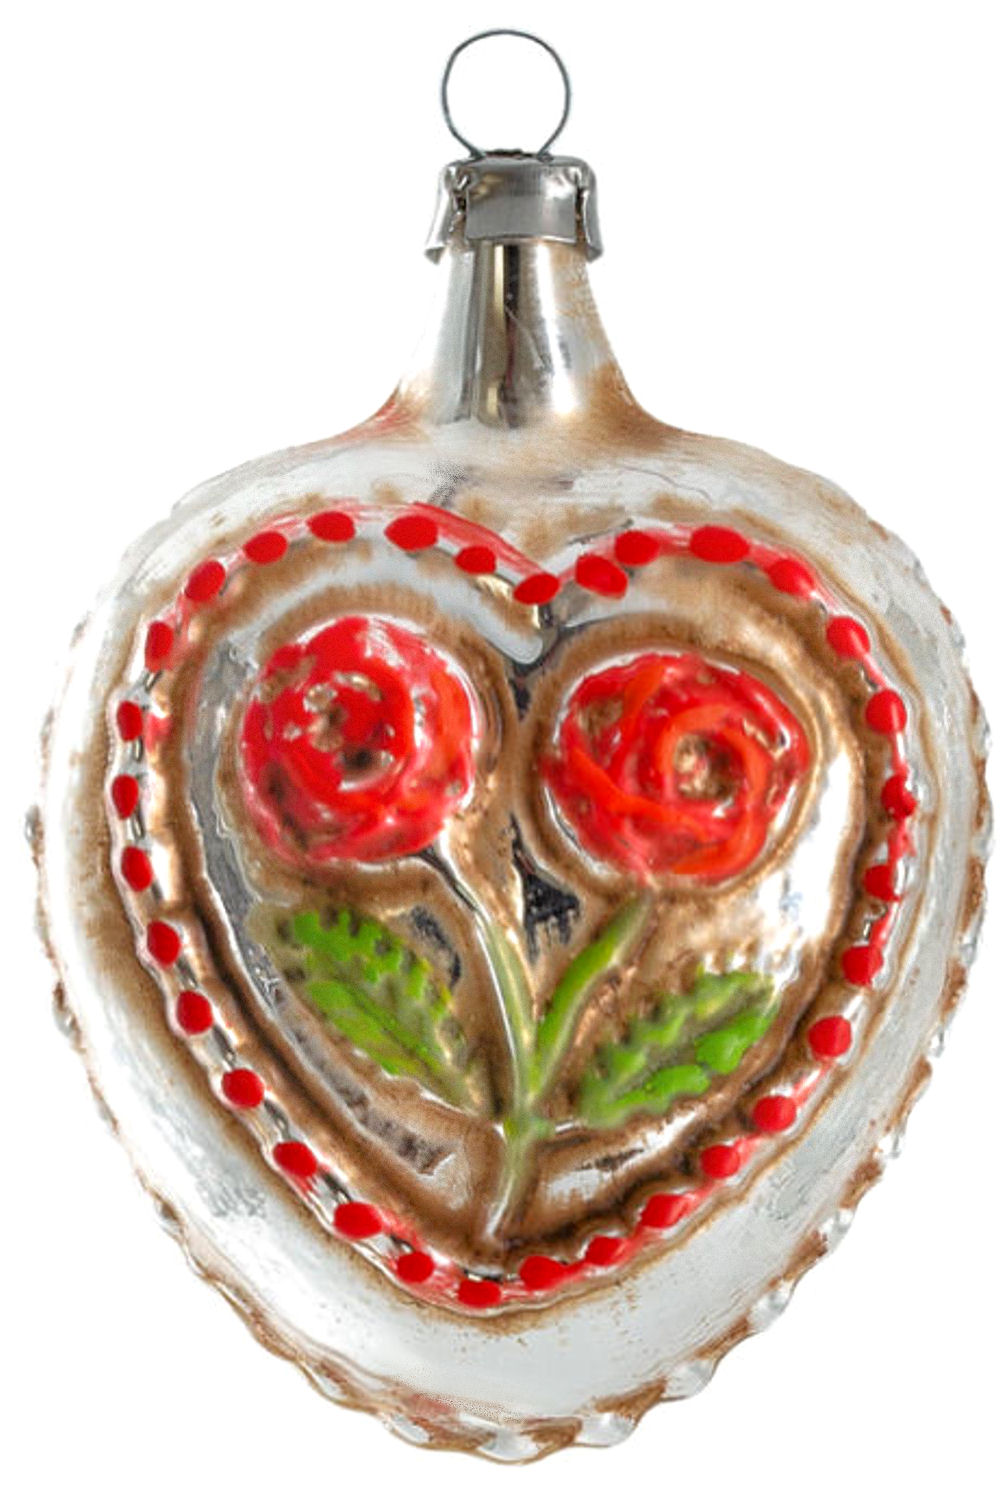 Rose heart with knobs and star